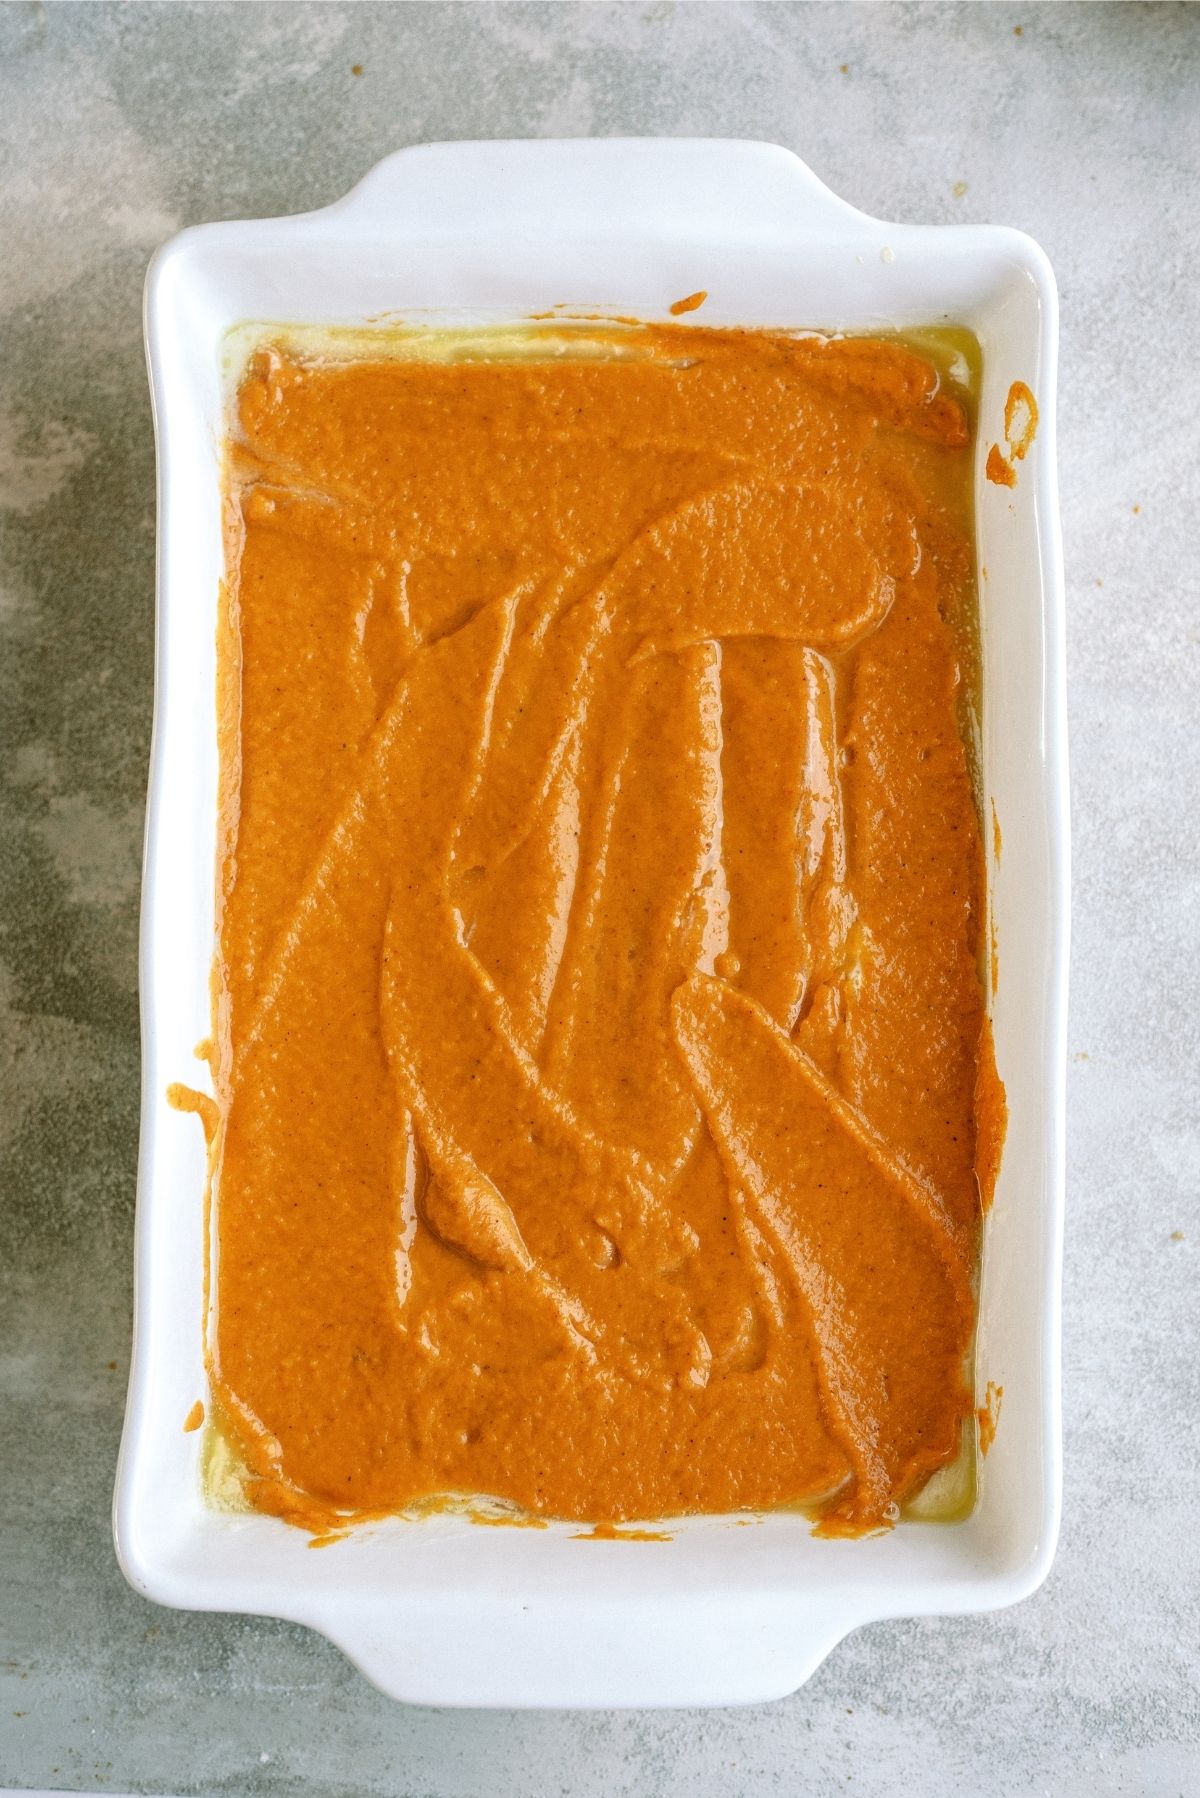 Pumpkin mixture layered on top of other layers in 9x13 pan